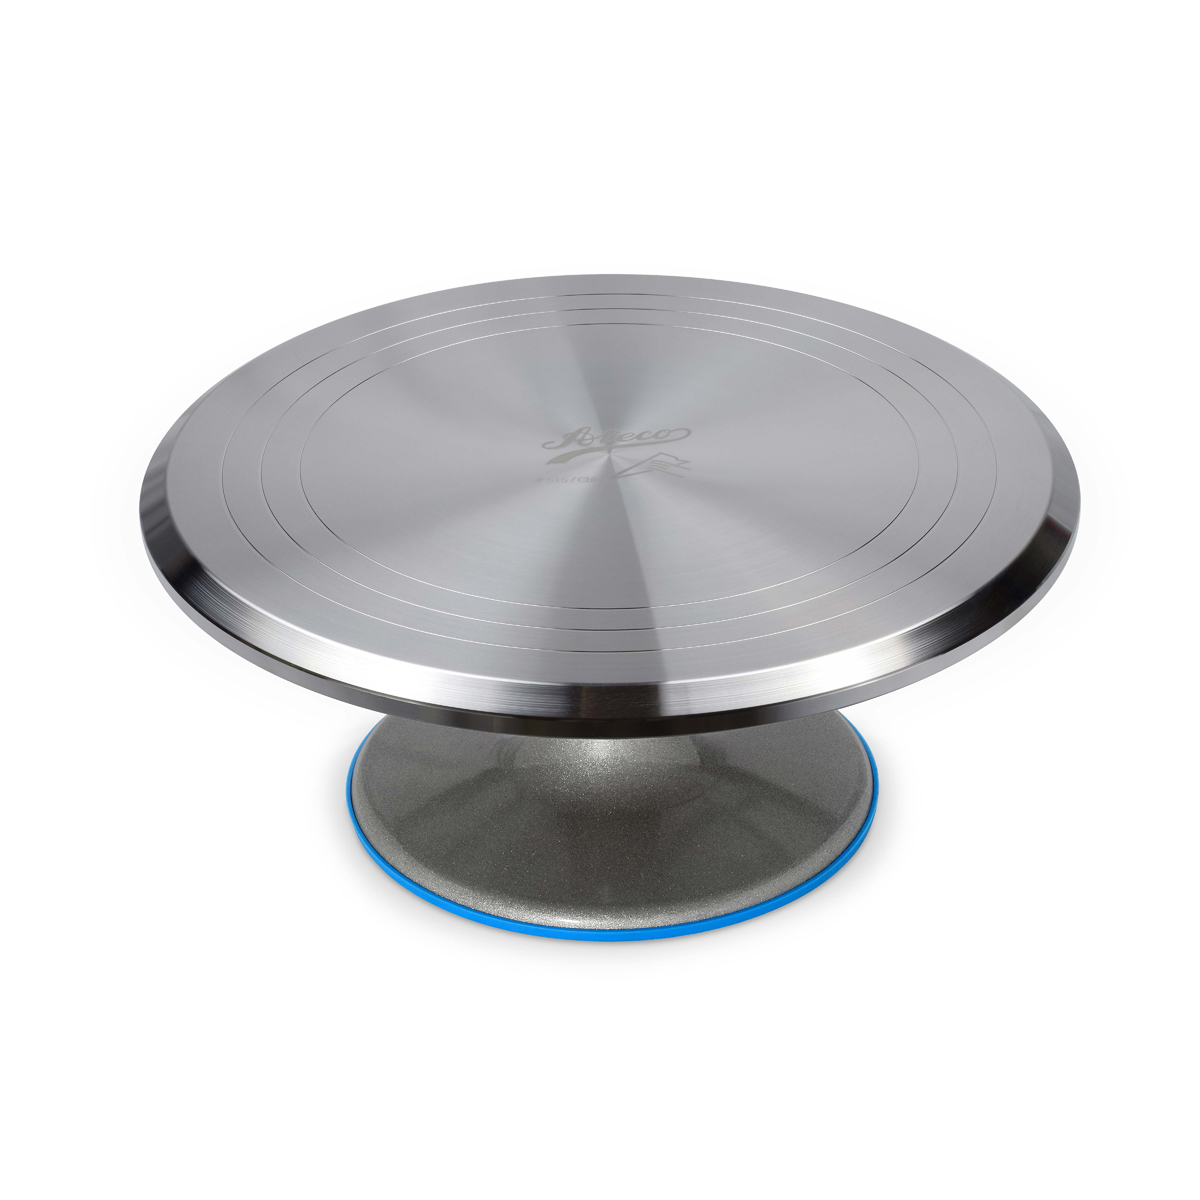 Ateco Decorating Turntable with Nonslip Base